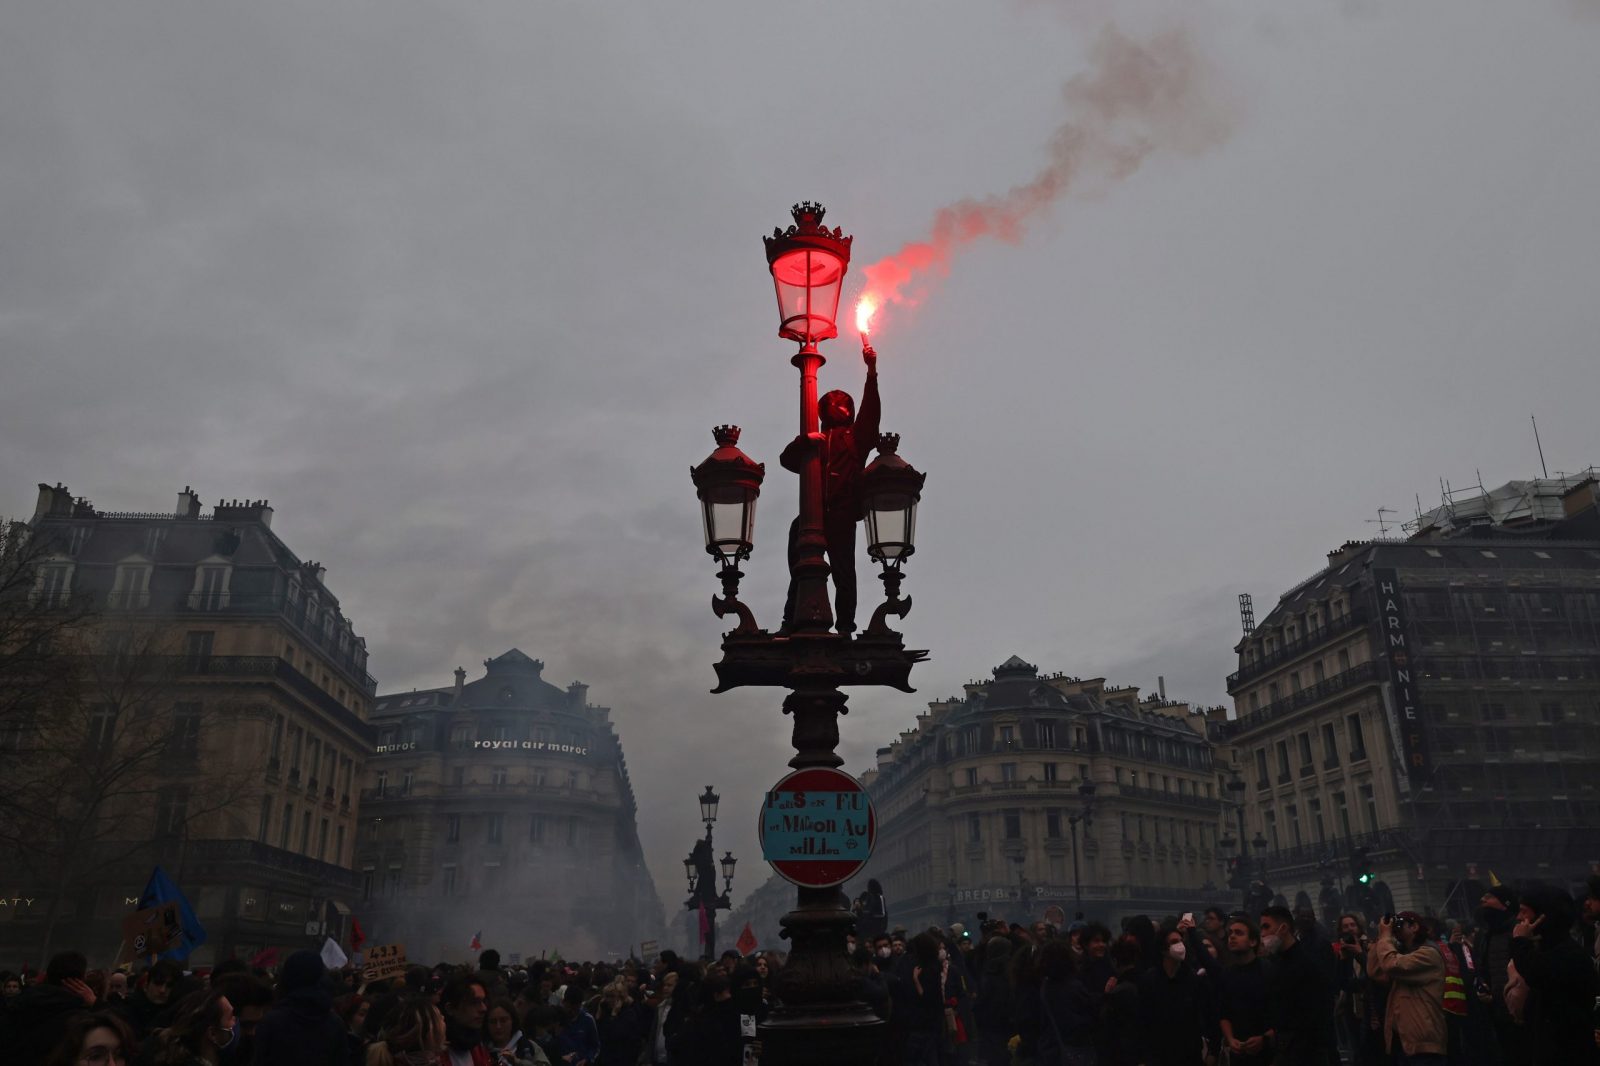 epa10539134 A protester lights a flair as thousands of people participate in a protest against the government's reform of the pension system in Paris, France, 23 March 2023. Protests continue in France after the prime minister announced on 16 March 2023 the use of Article 49 paragraph 3 (49.3) of the French Constitution to have the text on the controversial pension reform law - raising retirement age from 62 to 64 - be definitively adopted without a vote.  EPA/MOHAMMED BADRA